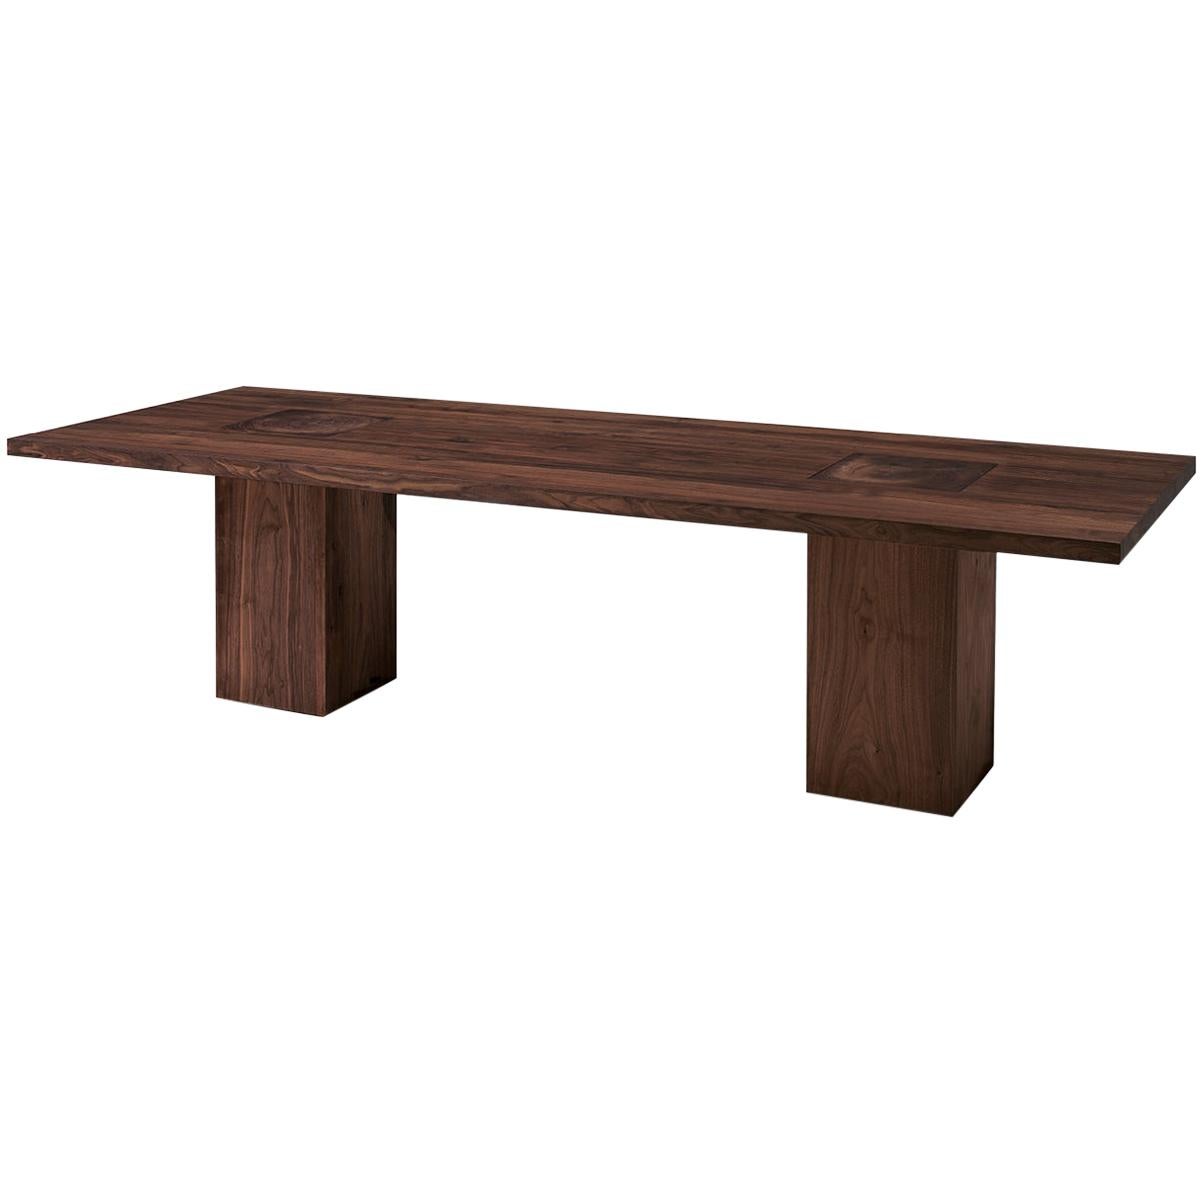 Full Wood Dining Table